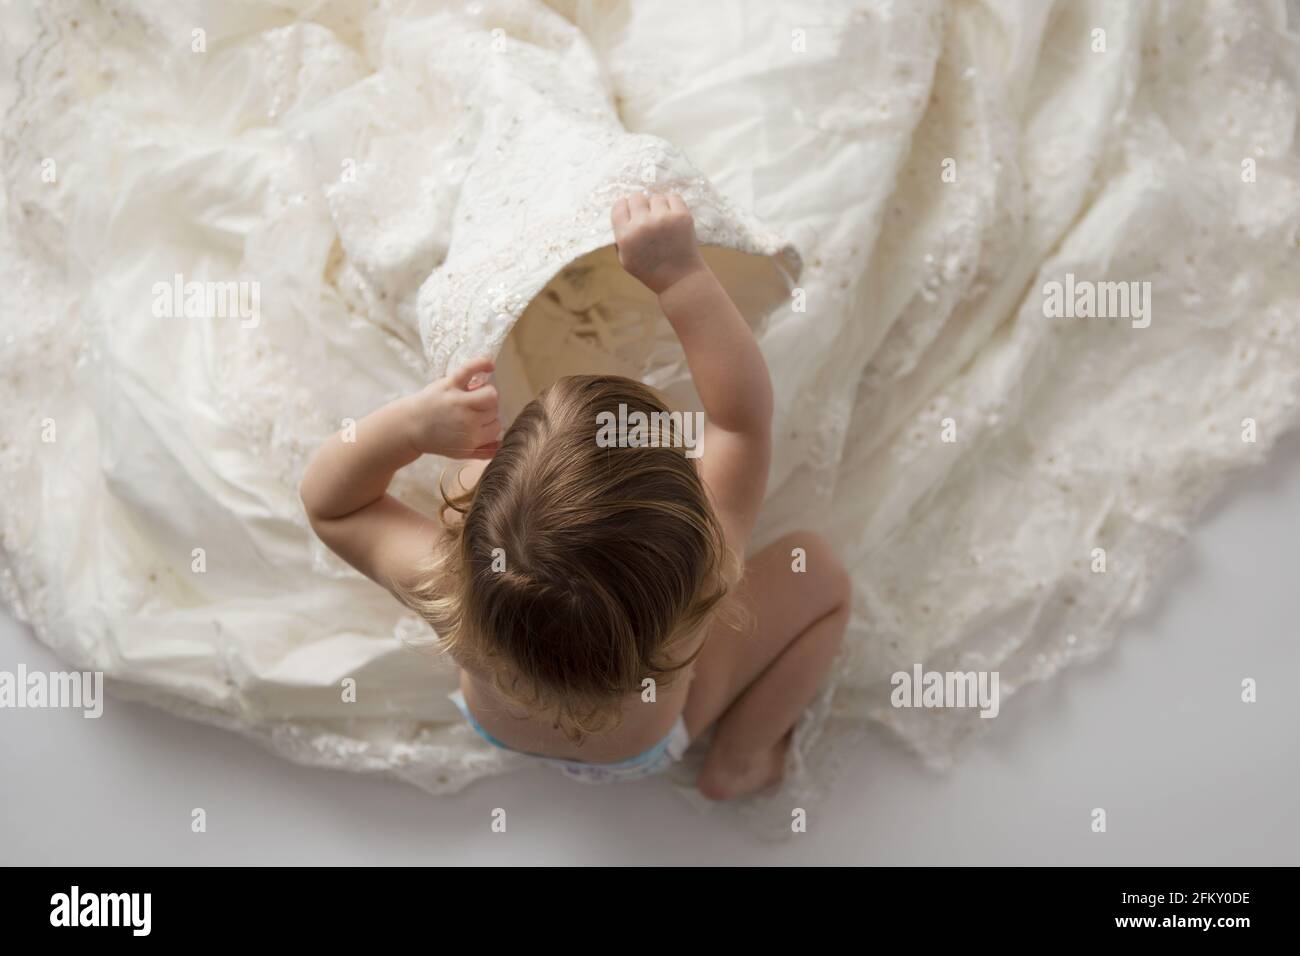 Toddler girl looks inside bodice of mother's wedding gown Stock Photo